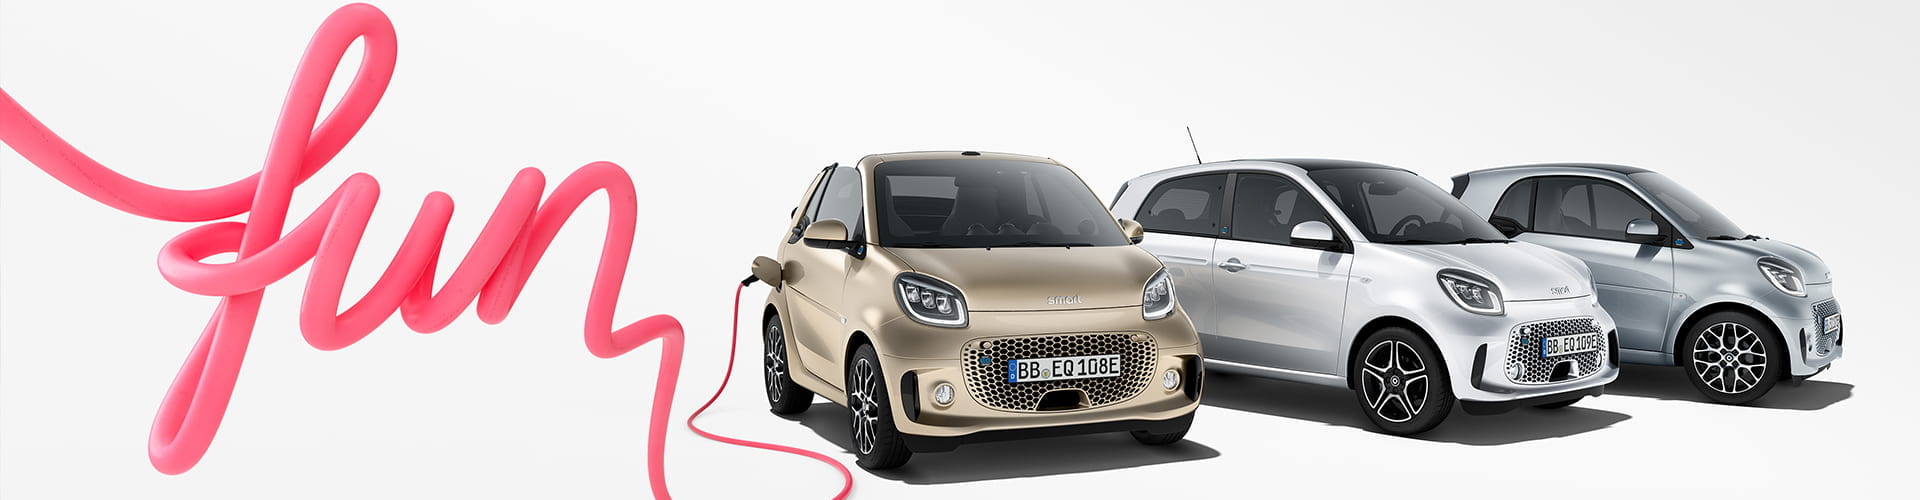 smart fortwo und smart forfour